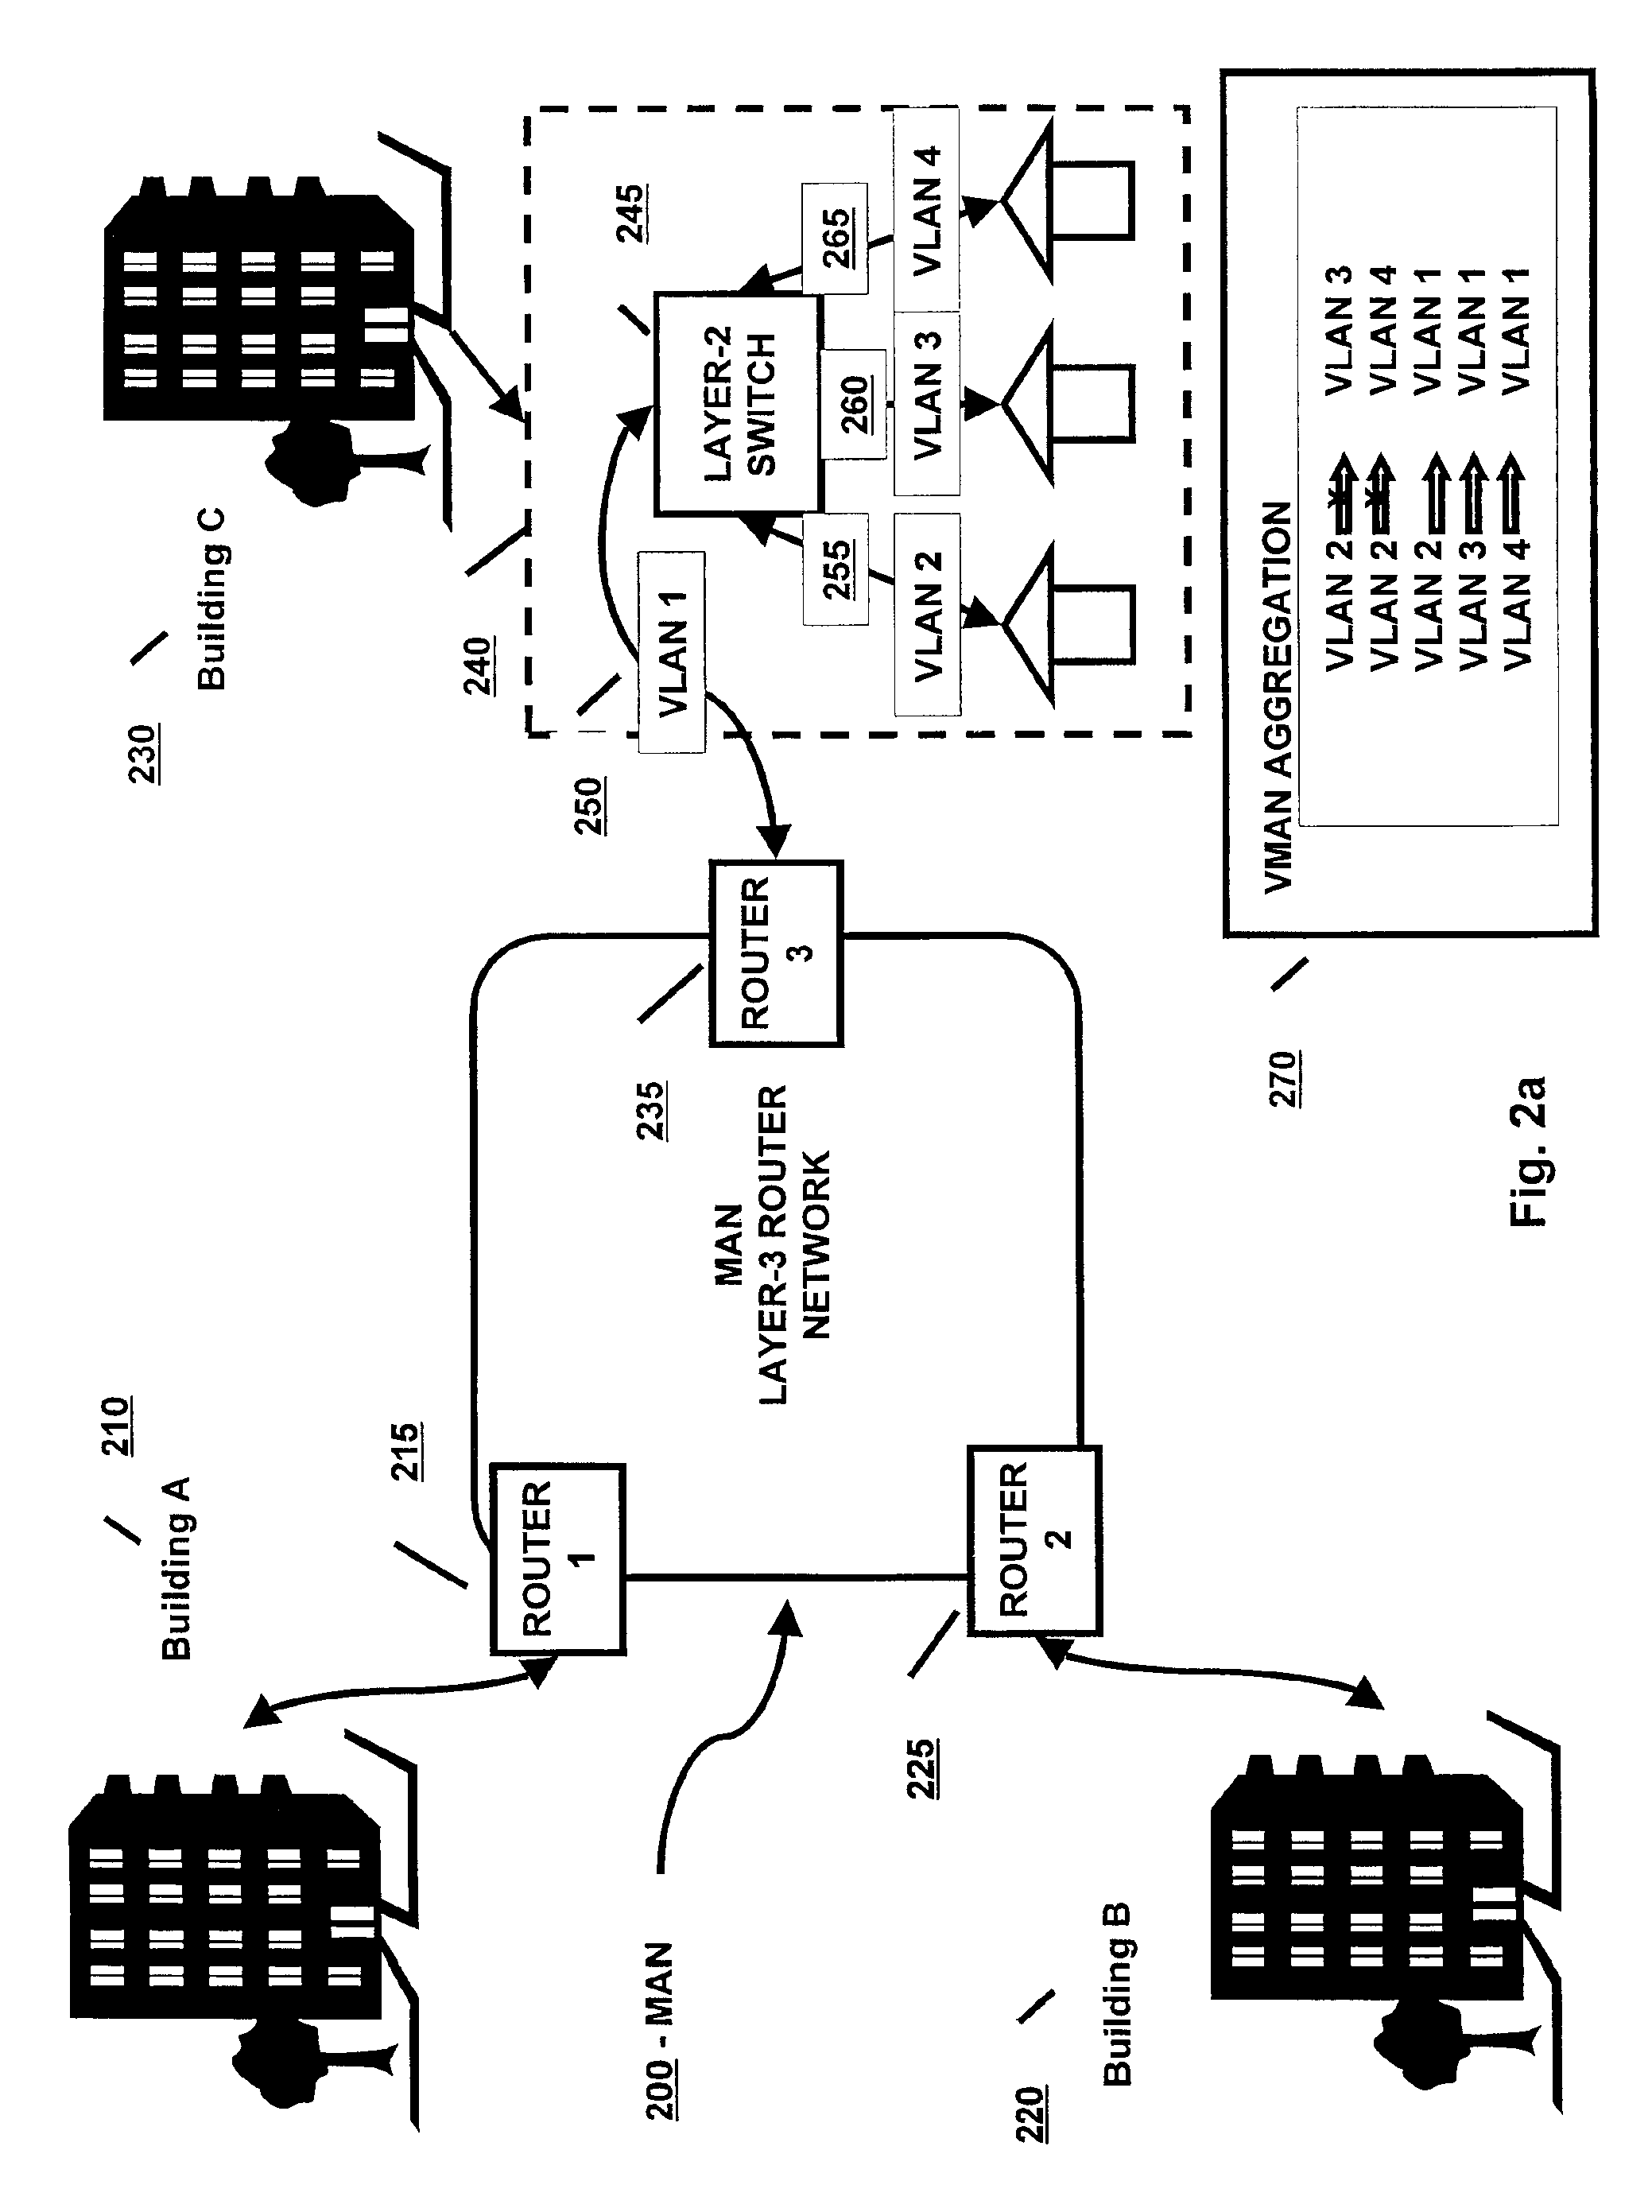 Method and system of aggregate multiple VLANs in a metropolitan area network